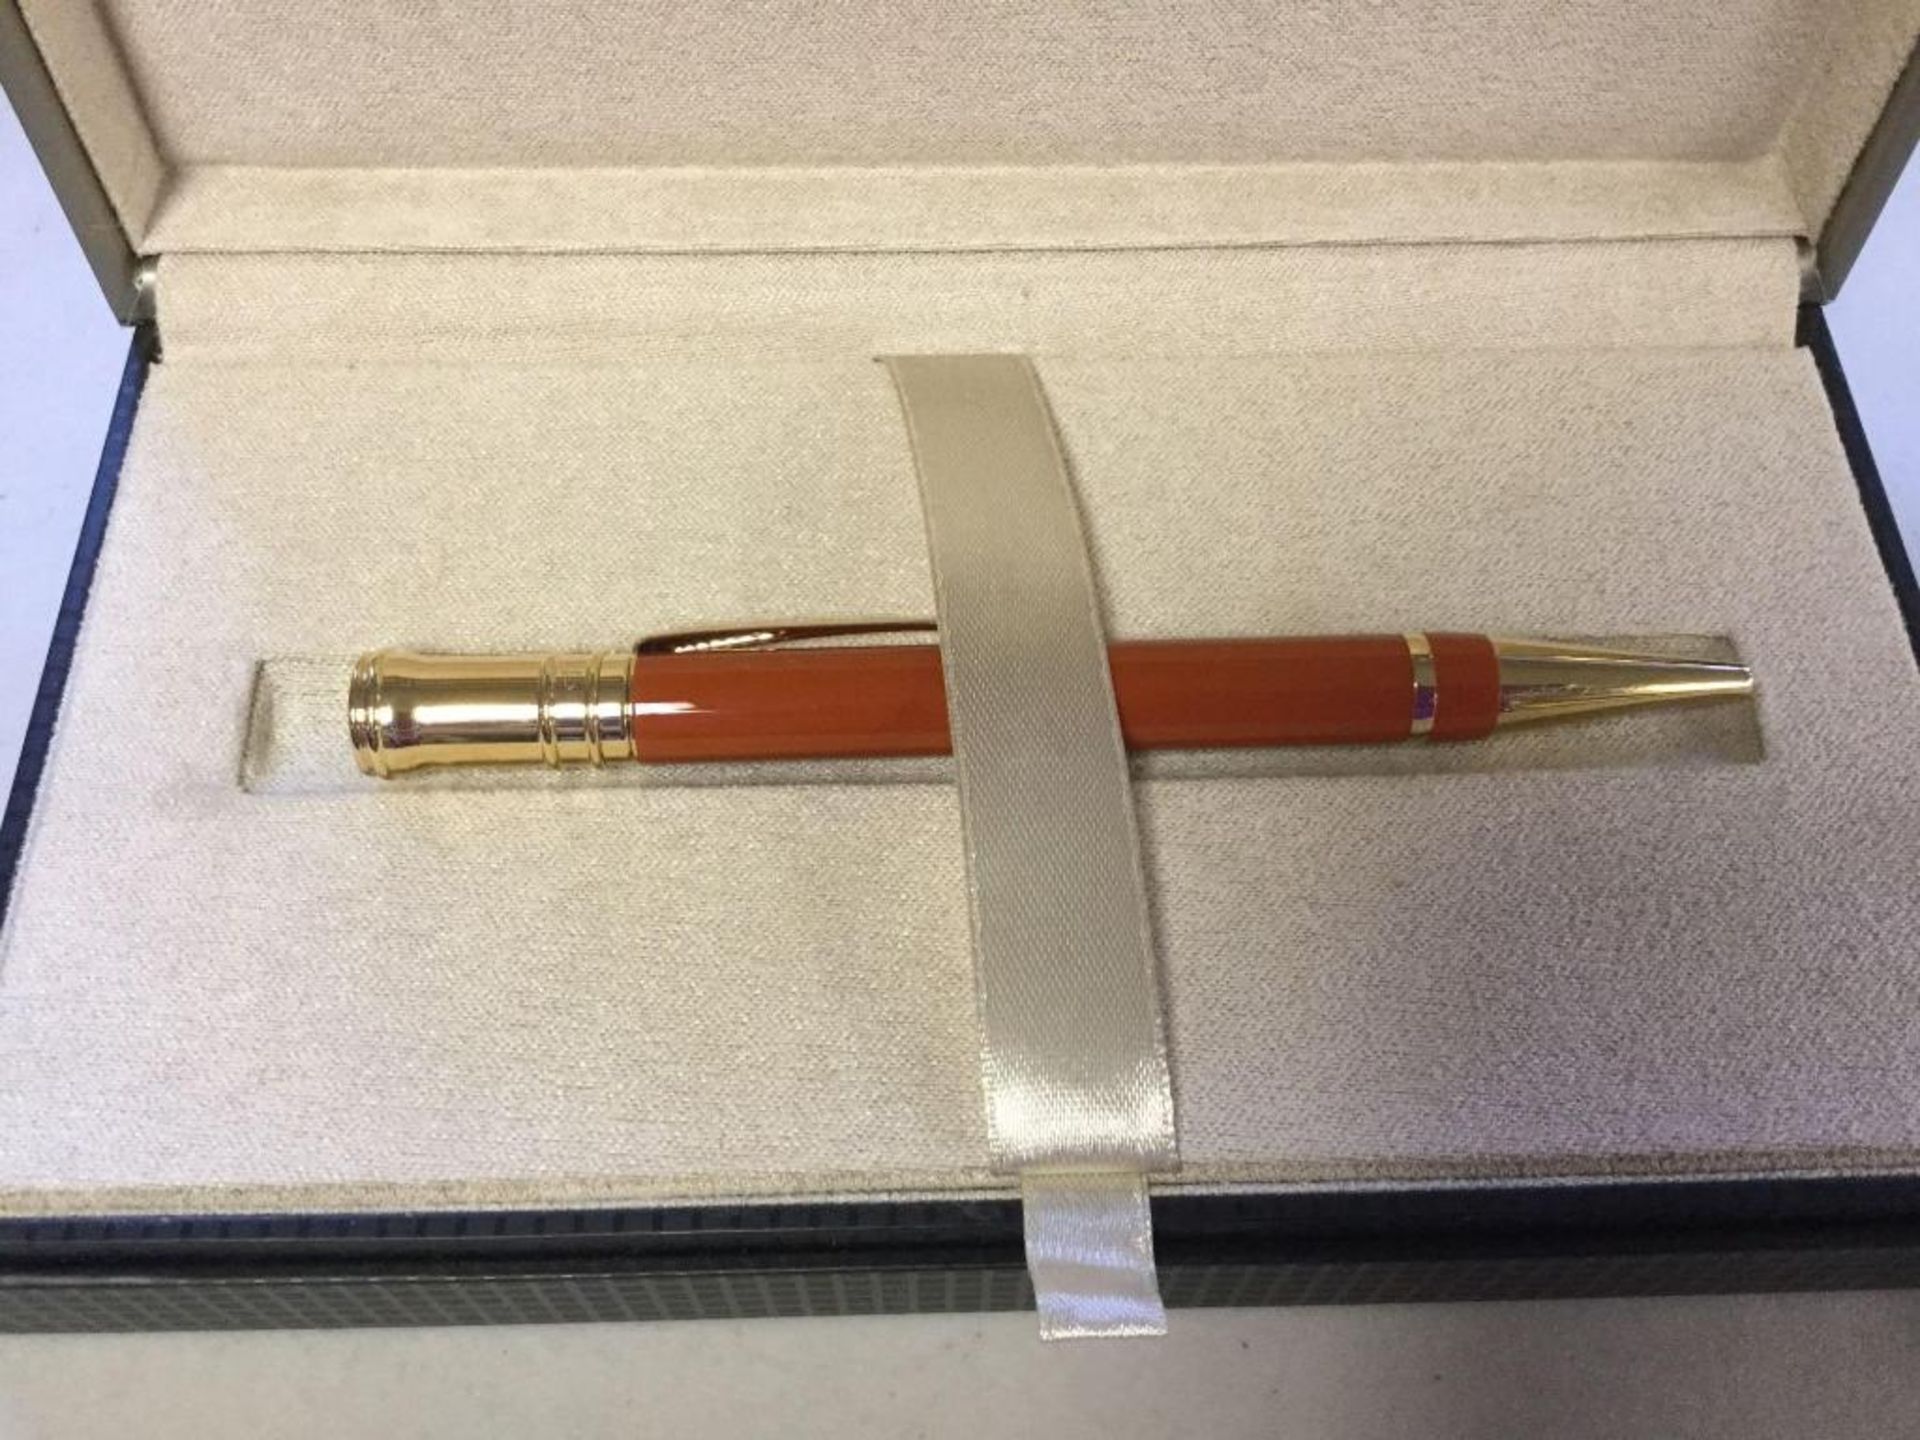 Parker Writing instrument with Case - Image 2 of 3